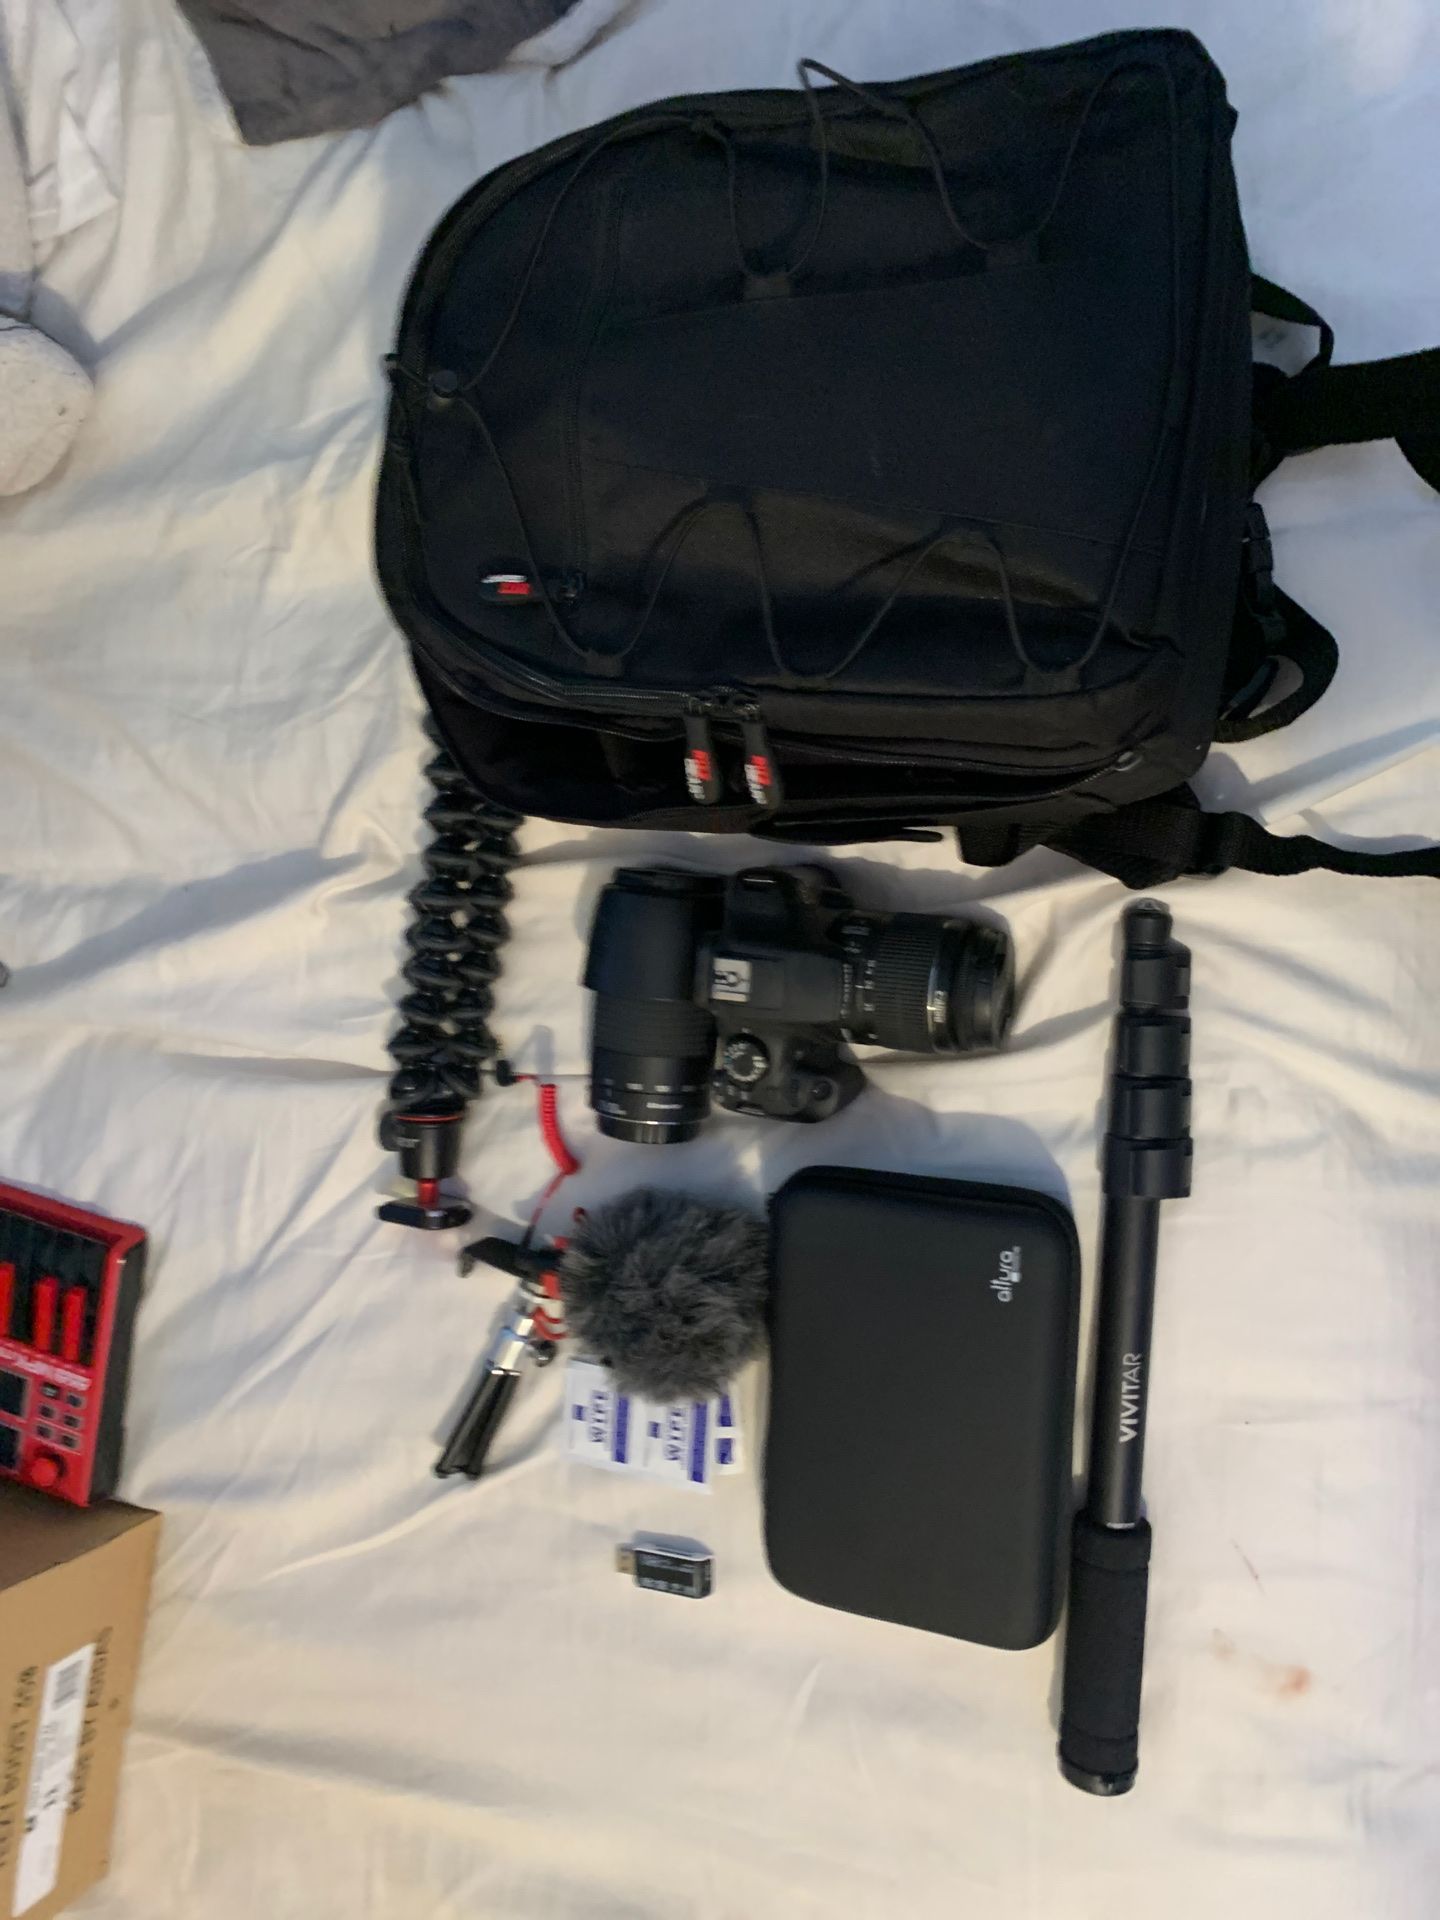 Canon rebel T6 with 2 lenses, rode mic, cleaning kit, tripods, and bag